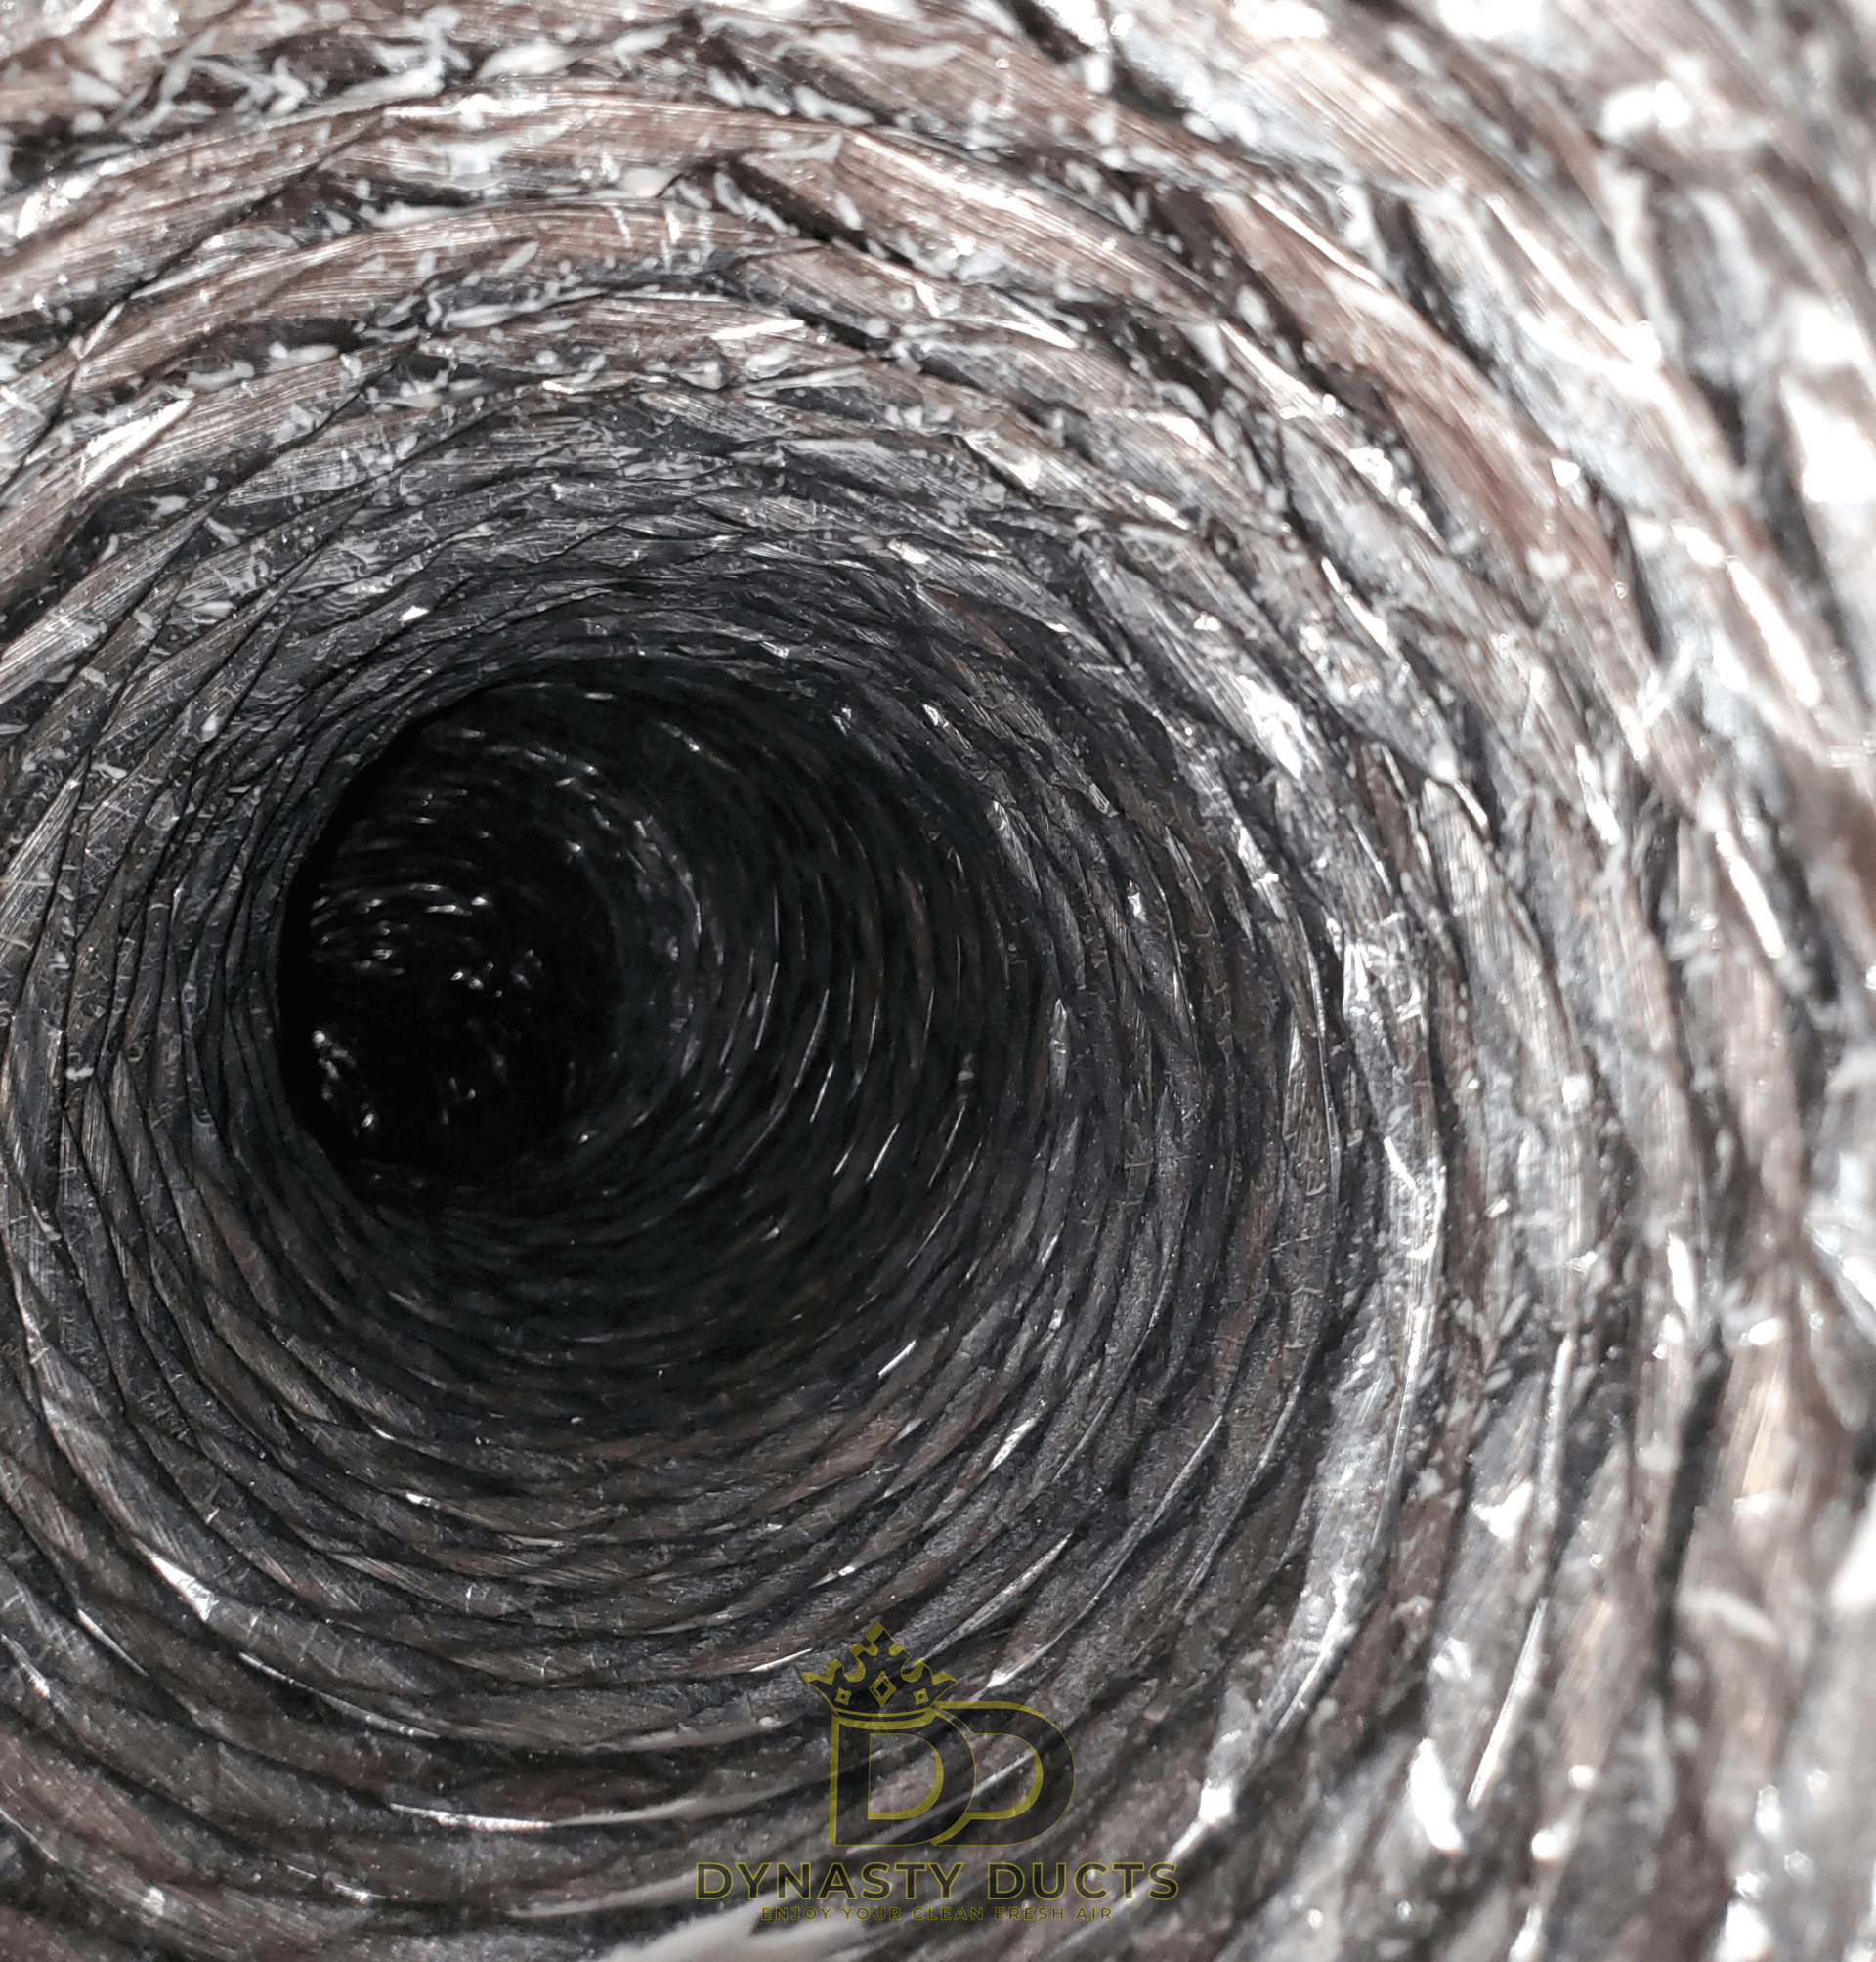 Completed Dryer Vent Cleaning Services